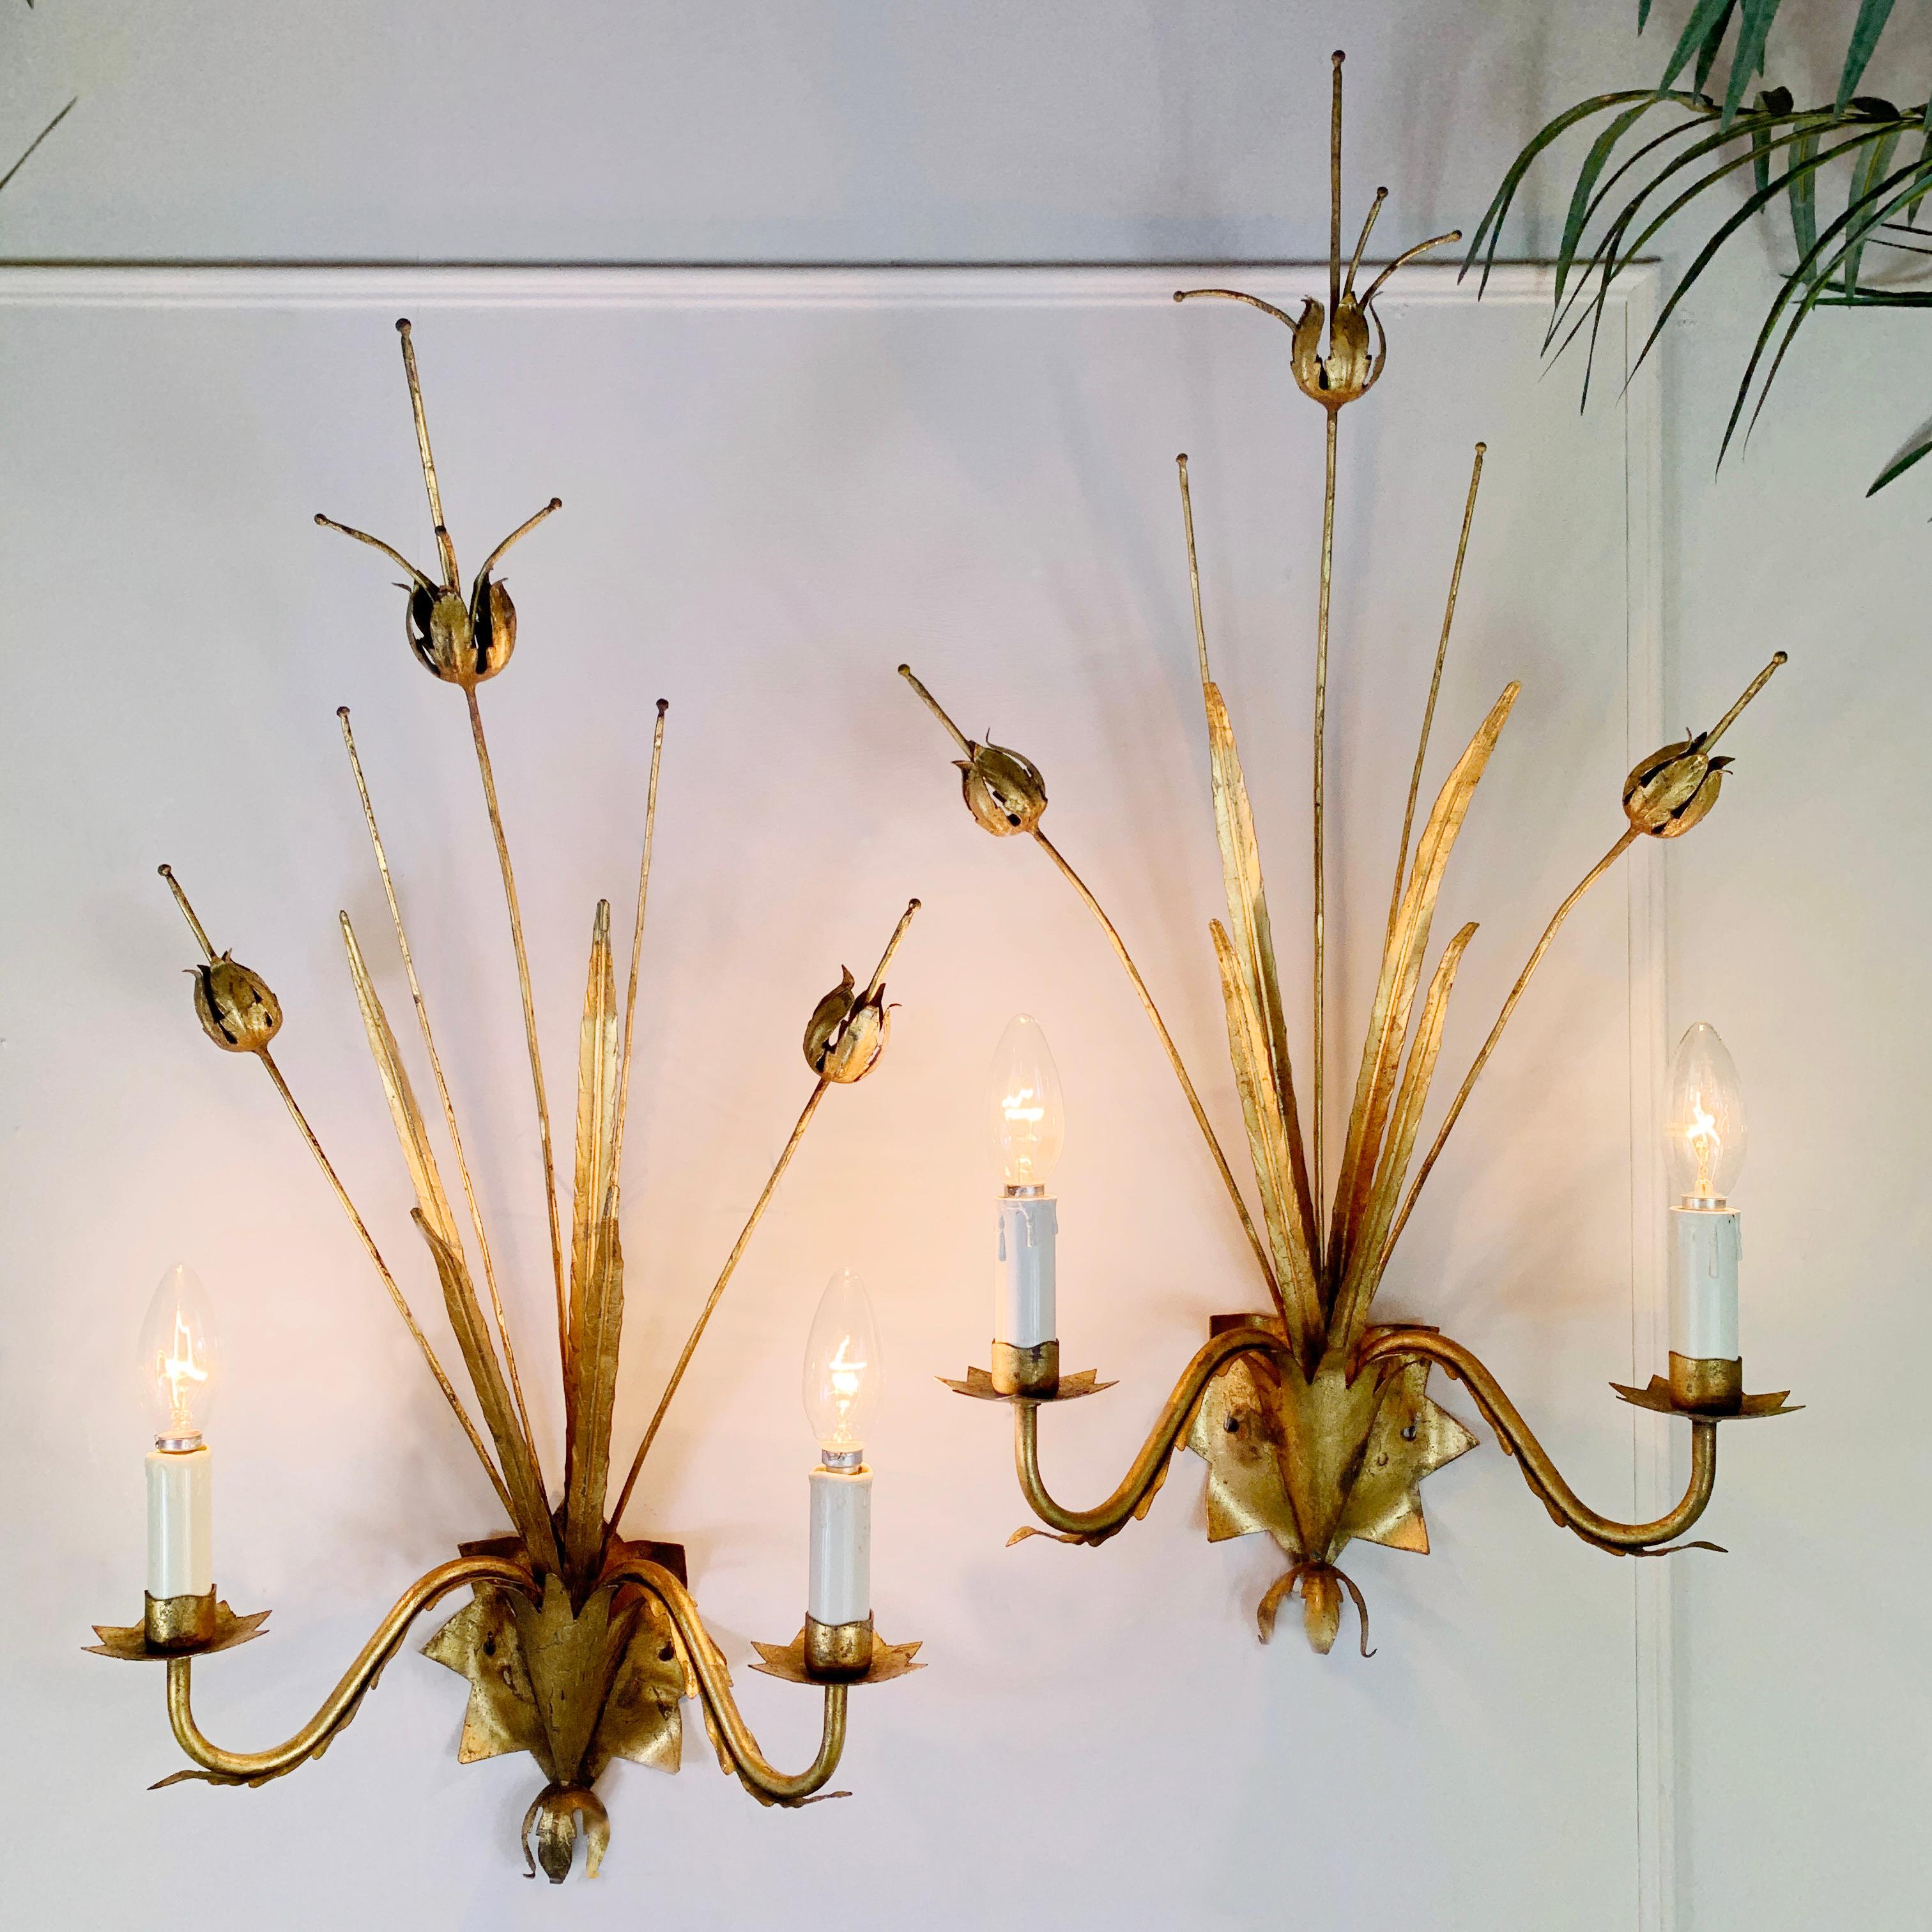 ‘Ferro Art’ gilt seed pod wall lights
Spain 1970's 
Large gilt wall lights in the design of tall stemmed seed pods with fine leaves
These lights are attributed to ‘Ferro Art’ 

70cm height, 36cm width, 17cm depth 

Each light takes 2 small